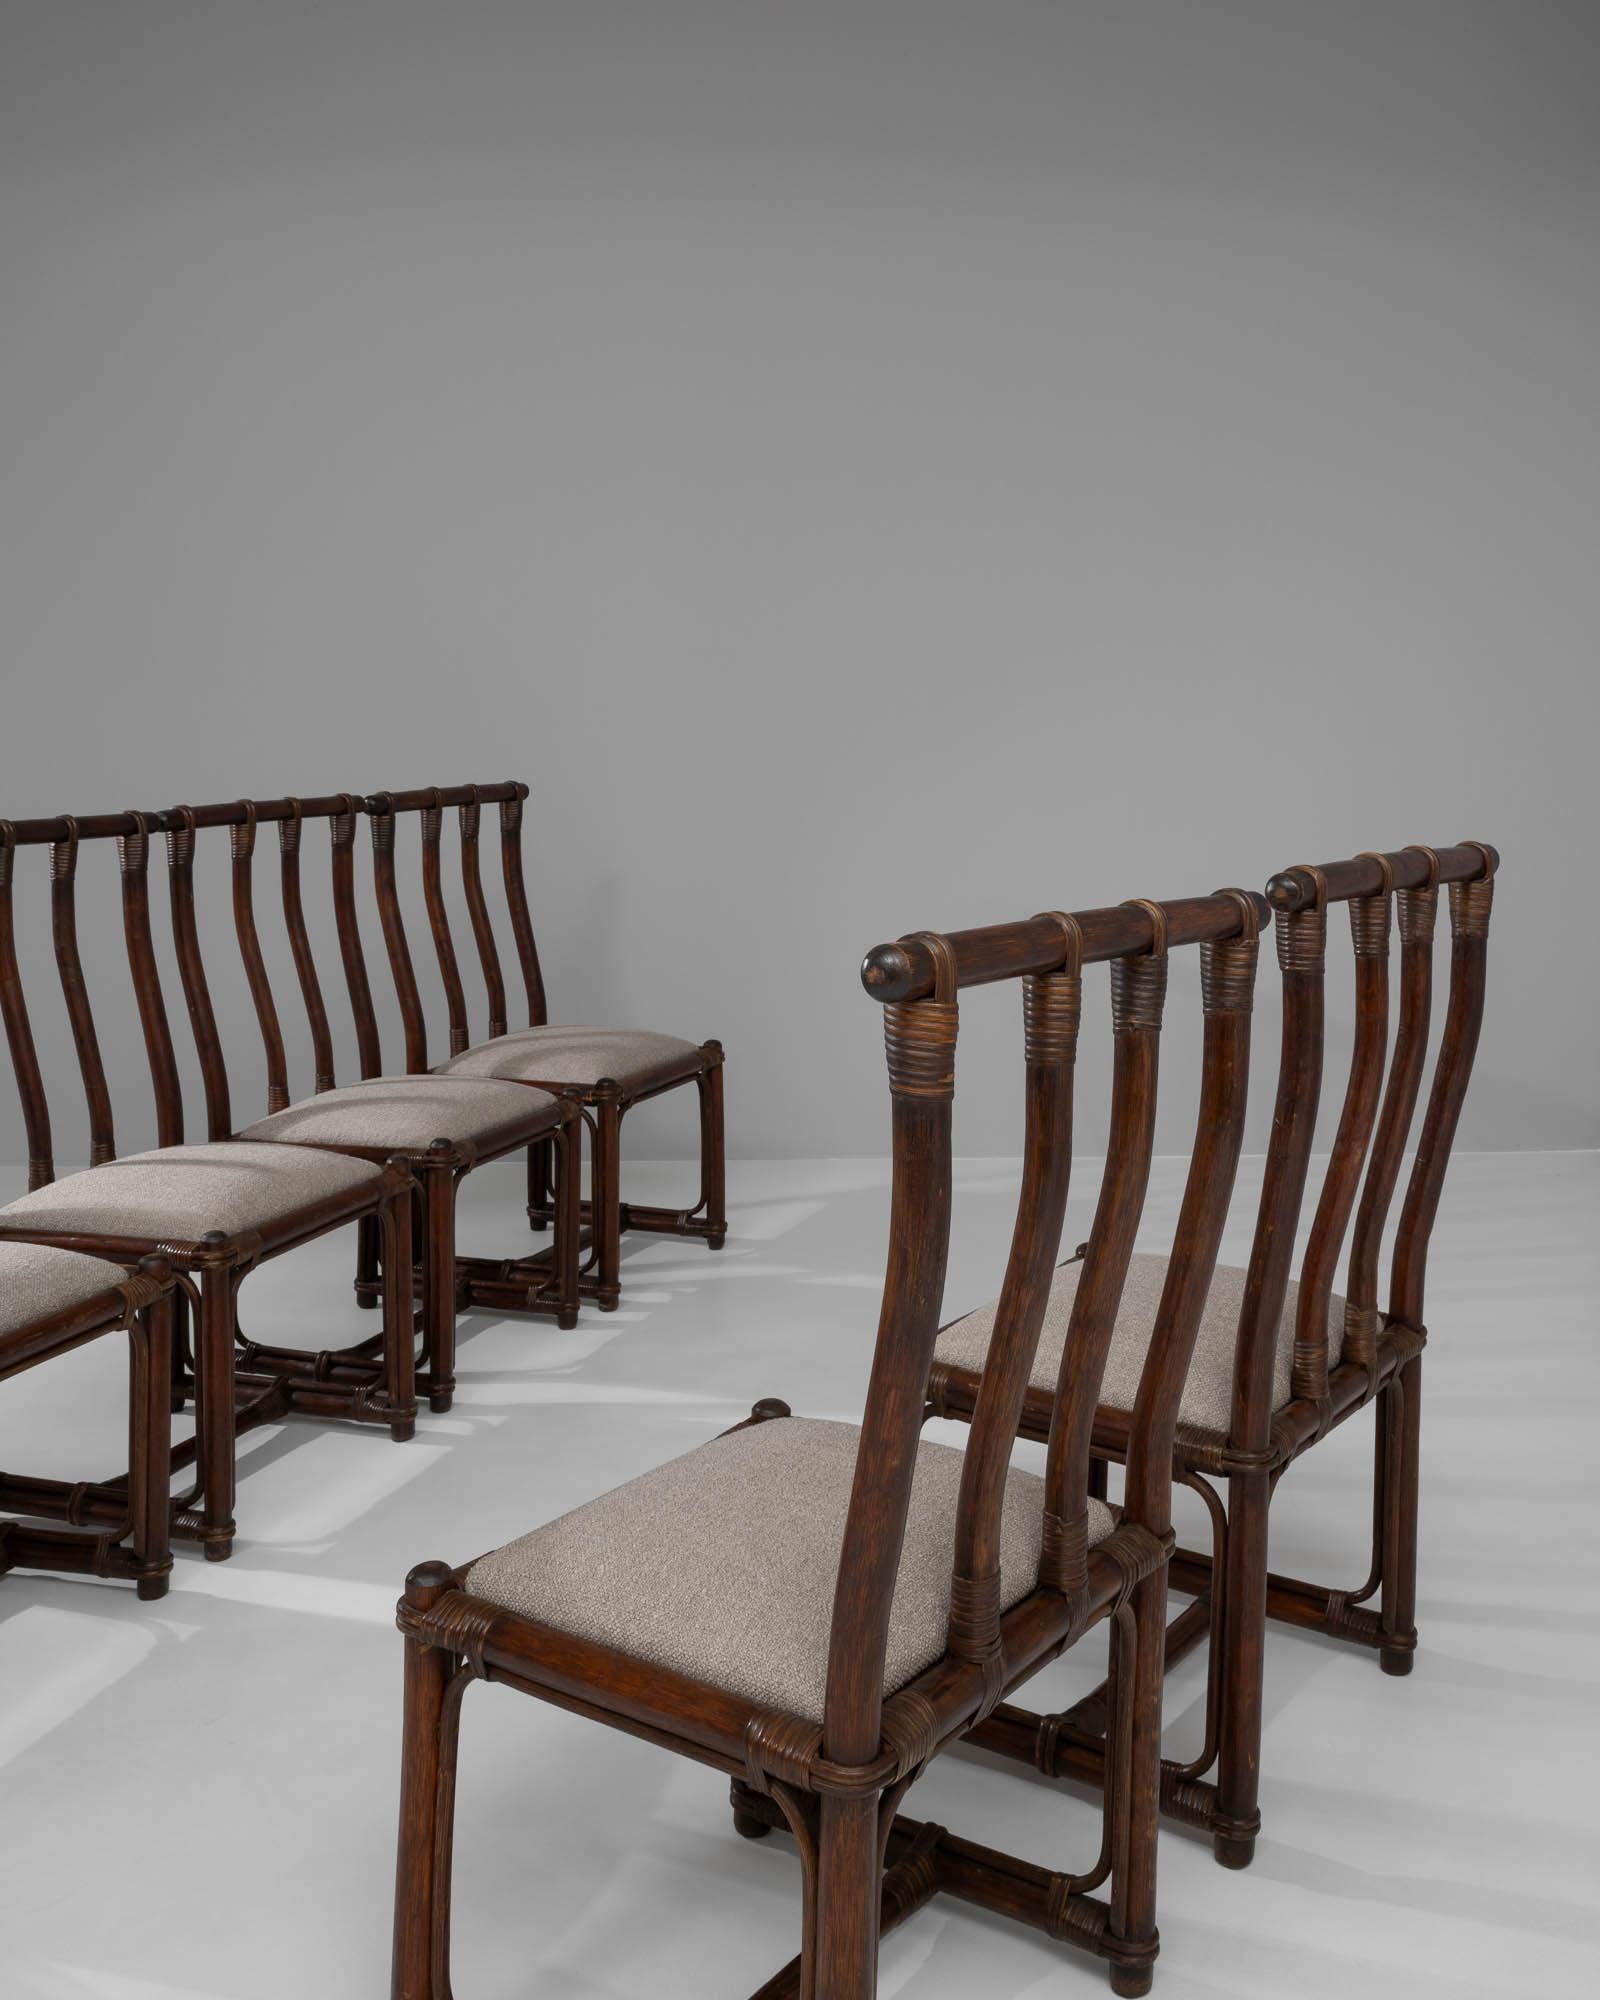 20th Century French Bamboo Dining Chairs With Upholstered Seats, Set of 7 For Sale 2